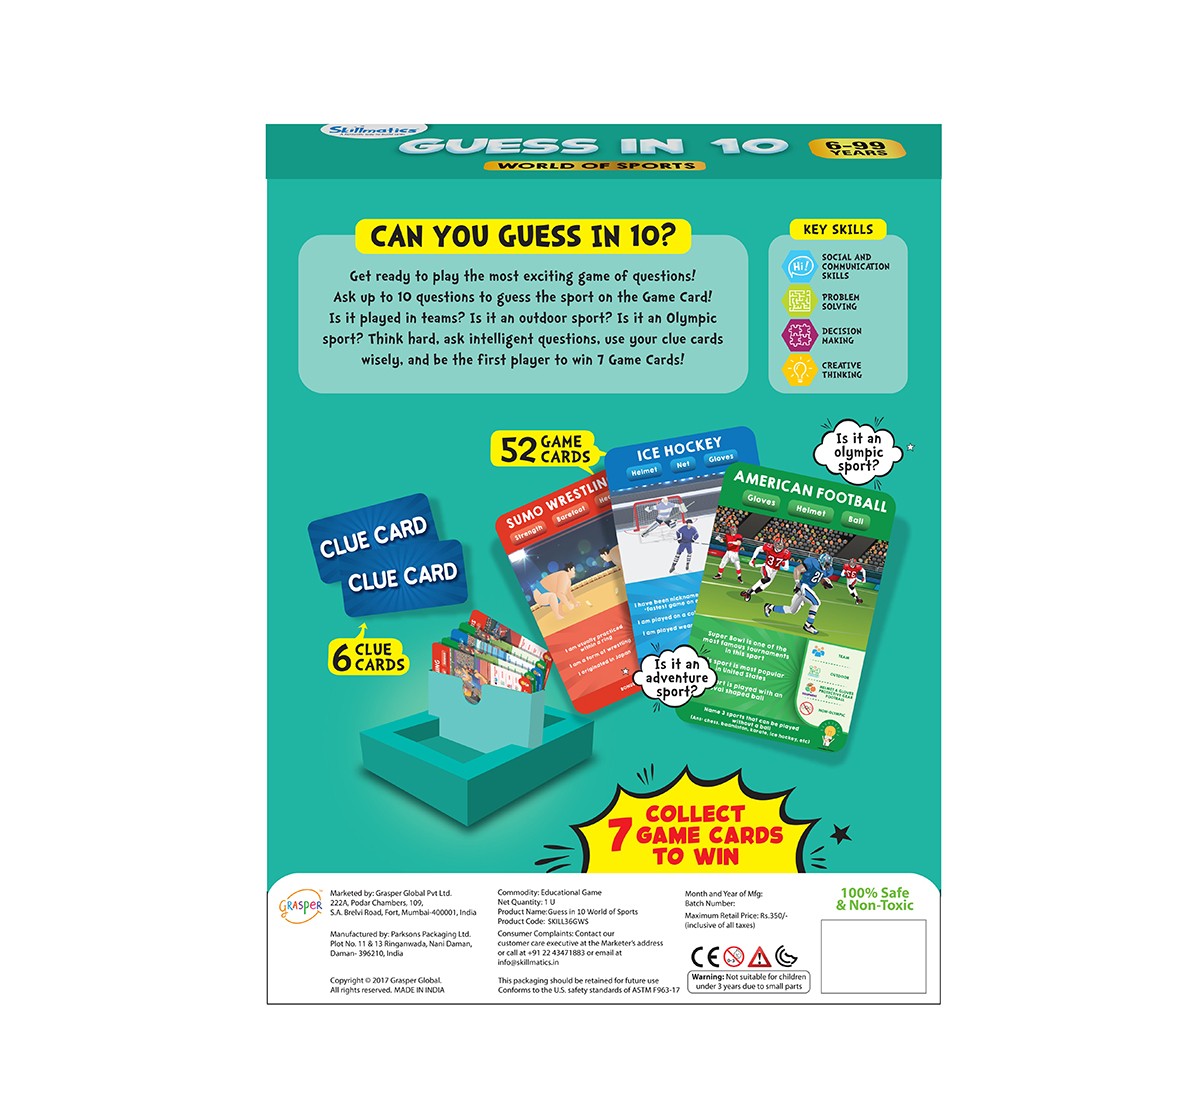 Skillmatics Guess In 10 World of Sports Games for Kids age 6Y+ 